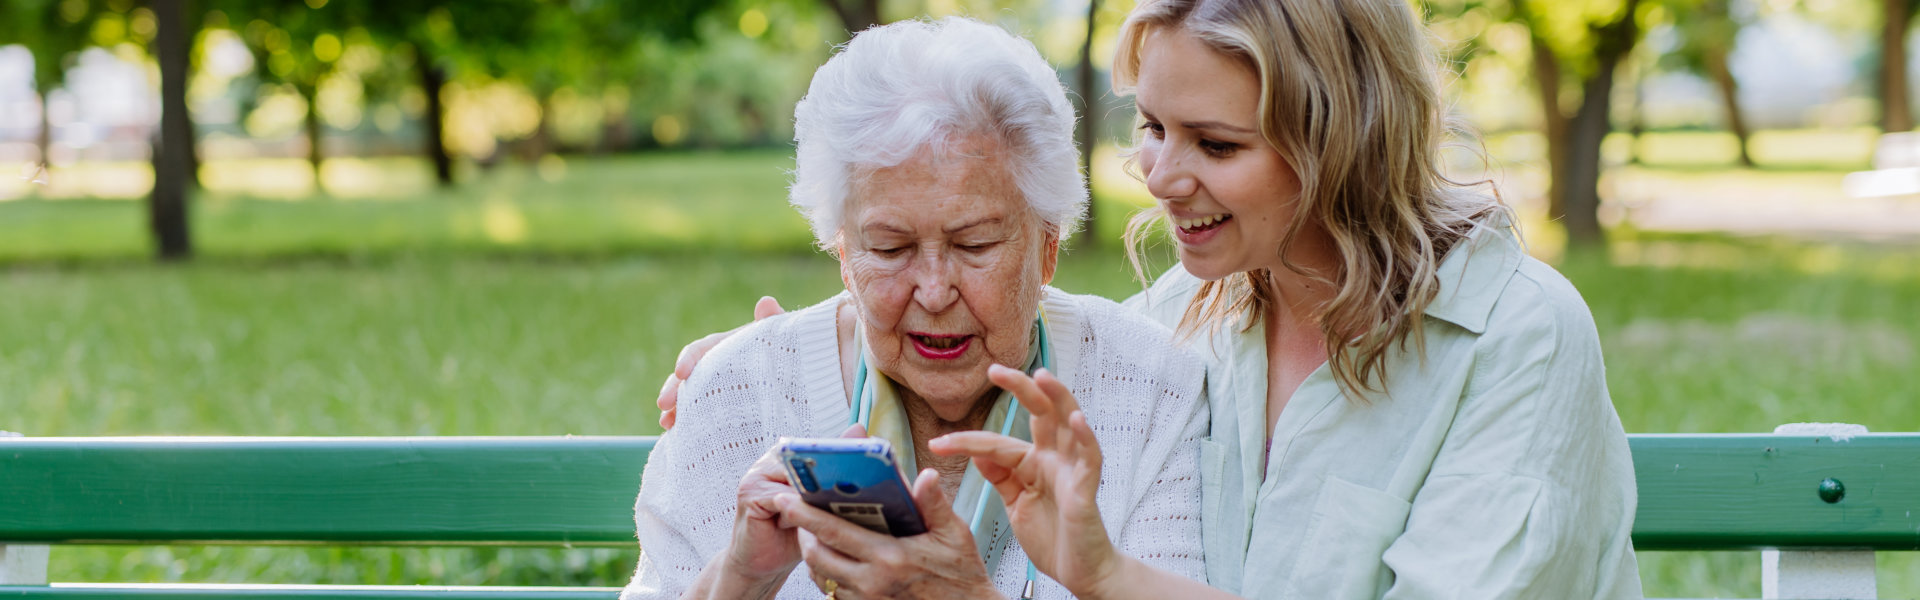 elderly and caregiver using cellphone